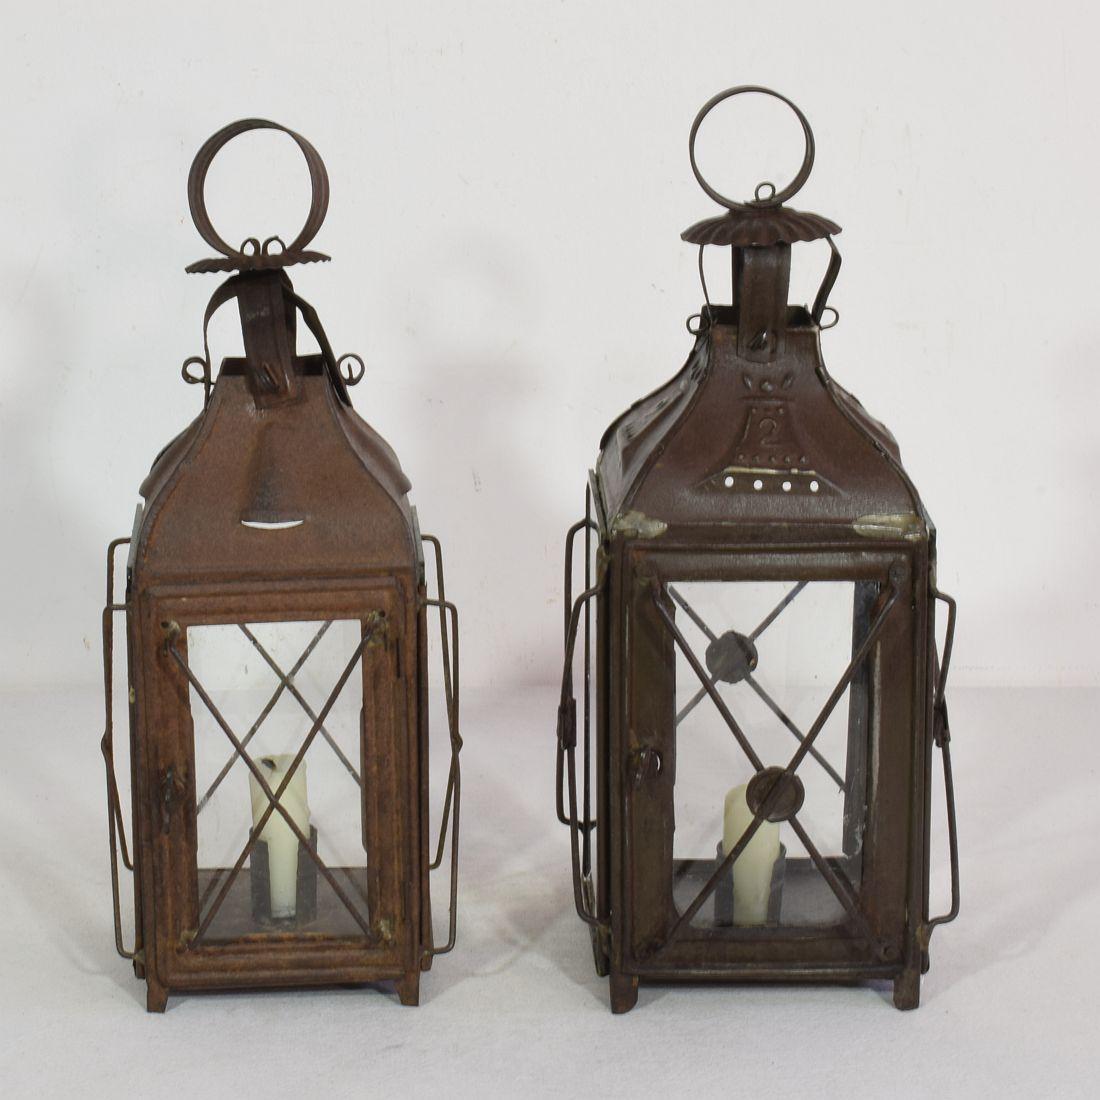 Nice pair of metal lanterns, France, circa 1850-1900.
Weathered and old repairs ( glass once replaced )
Measures: H:30-31cm W:12-13cm D:12-13cm 
Measurement here below of the largest lantern.